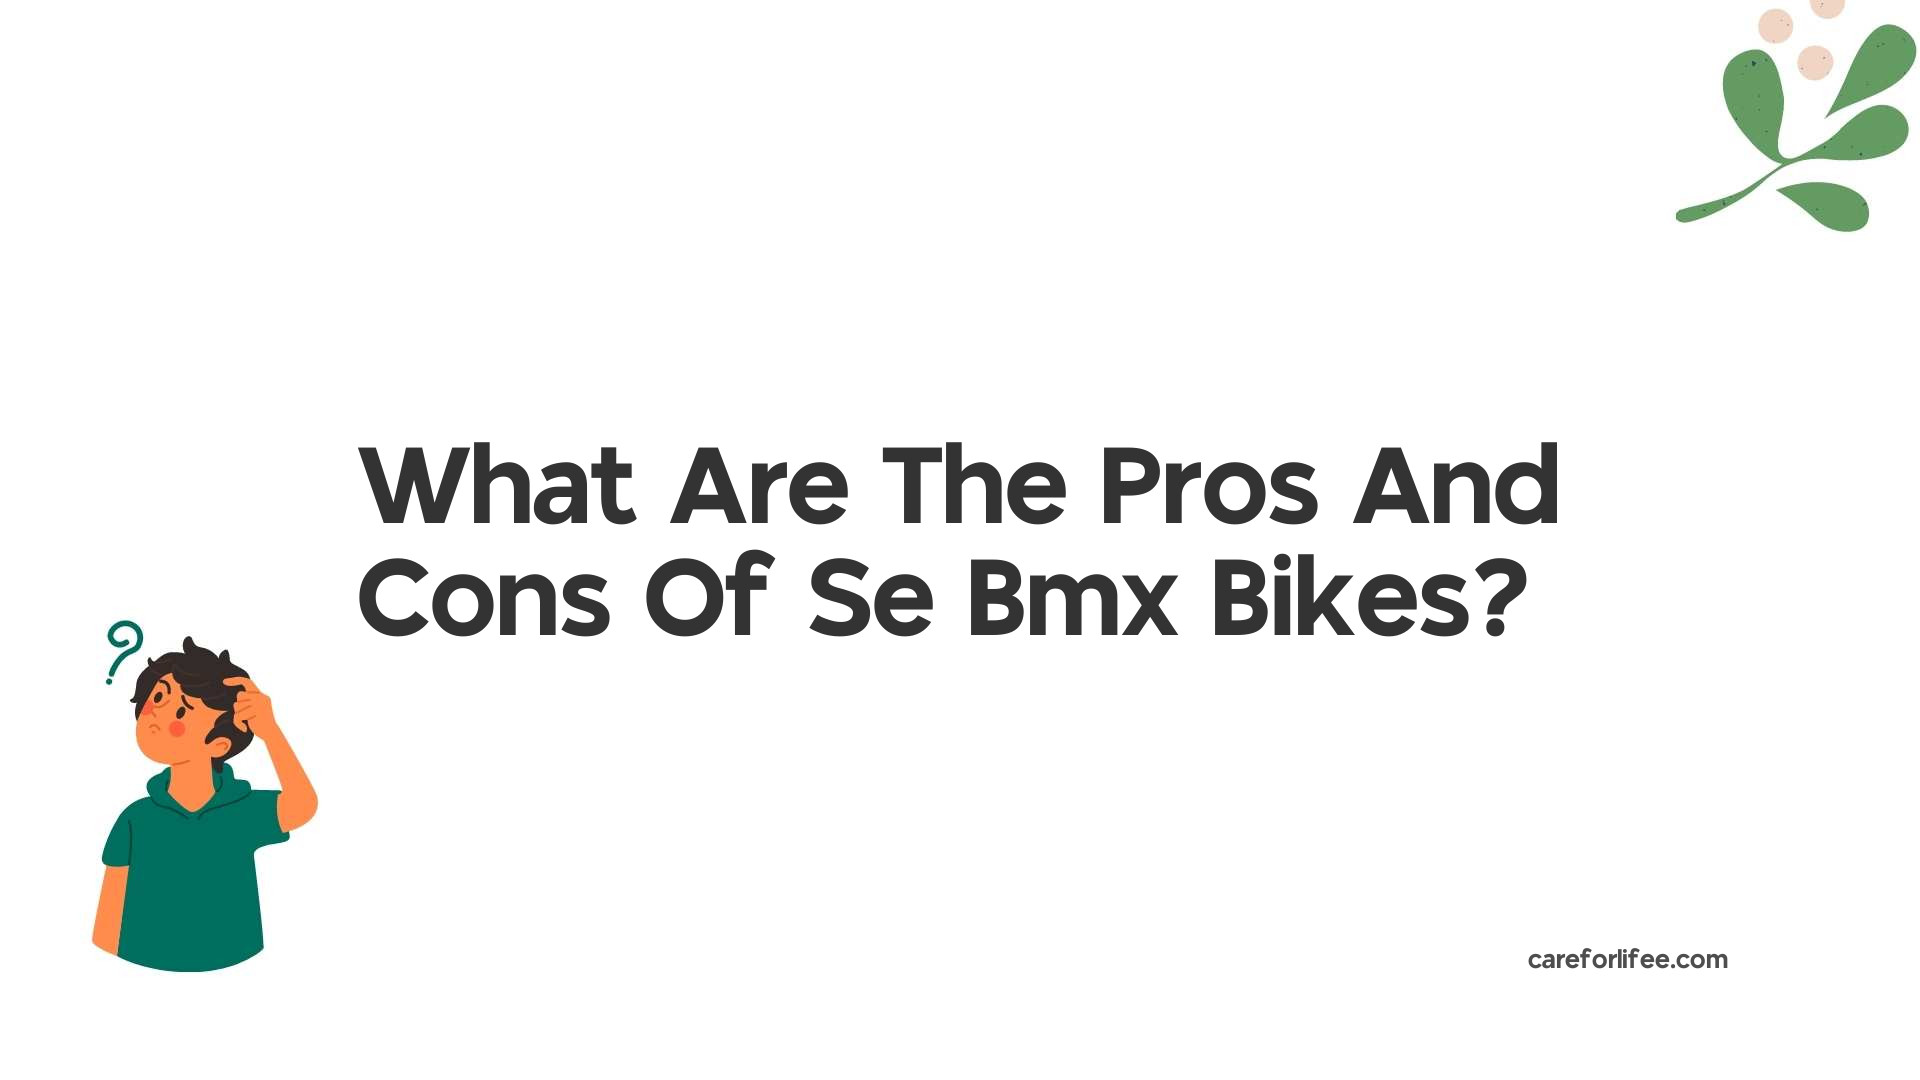 What Are The Pros And Cons Of Se Bmx Bikes?